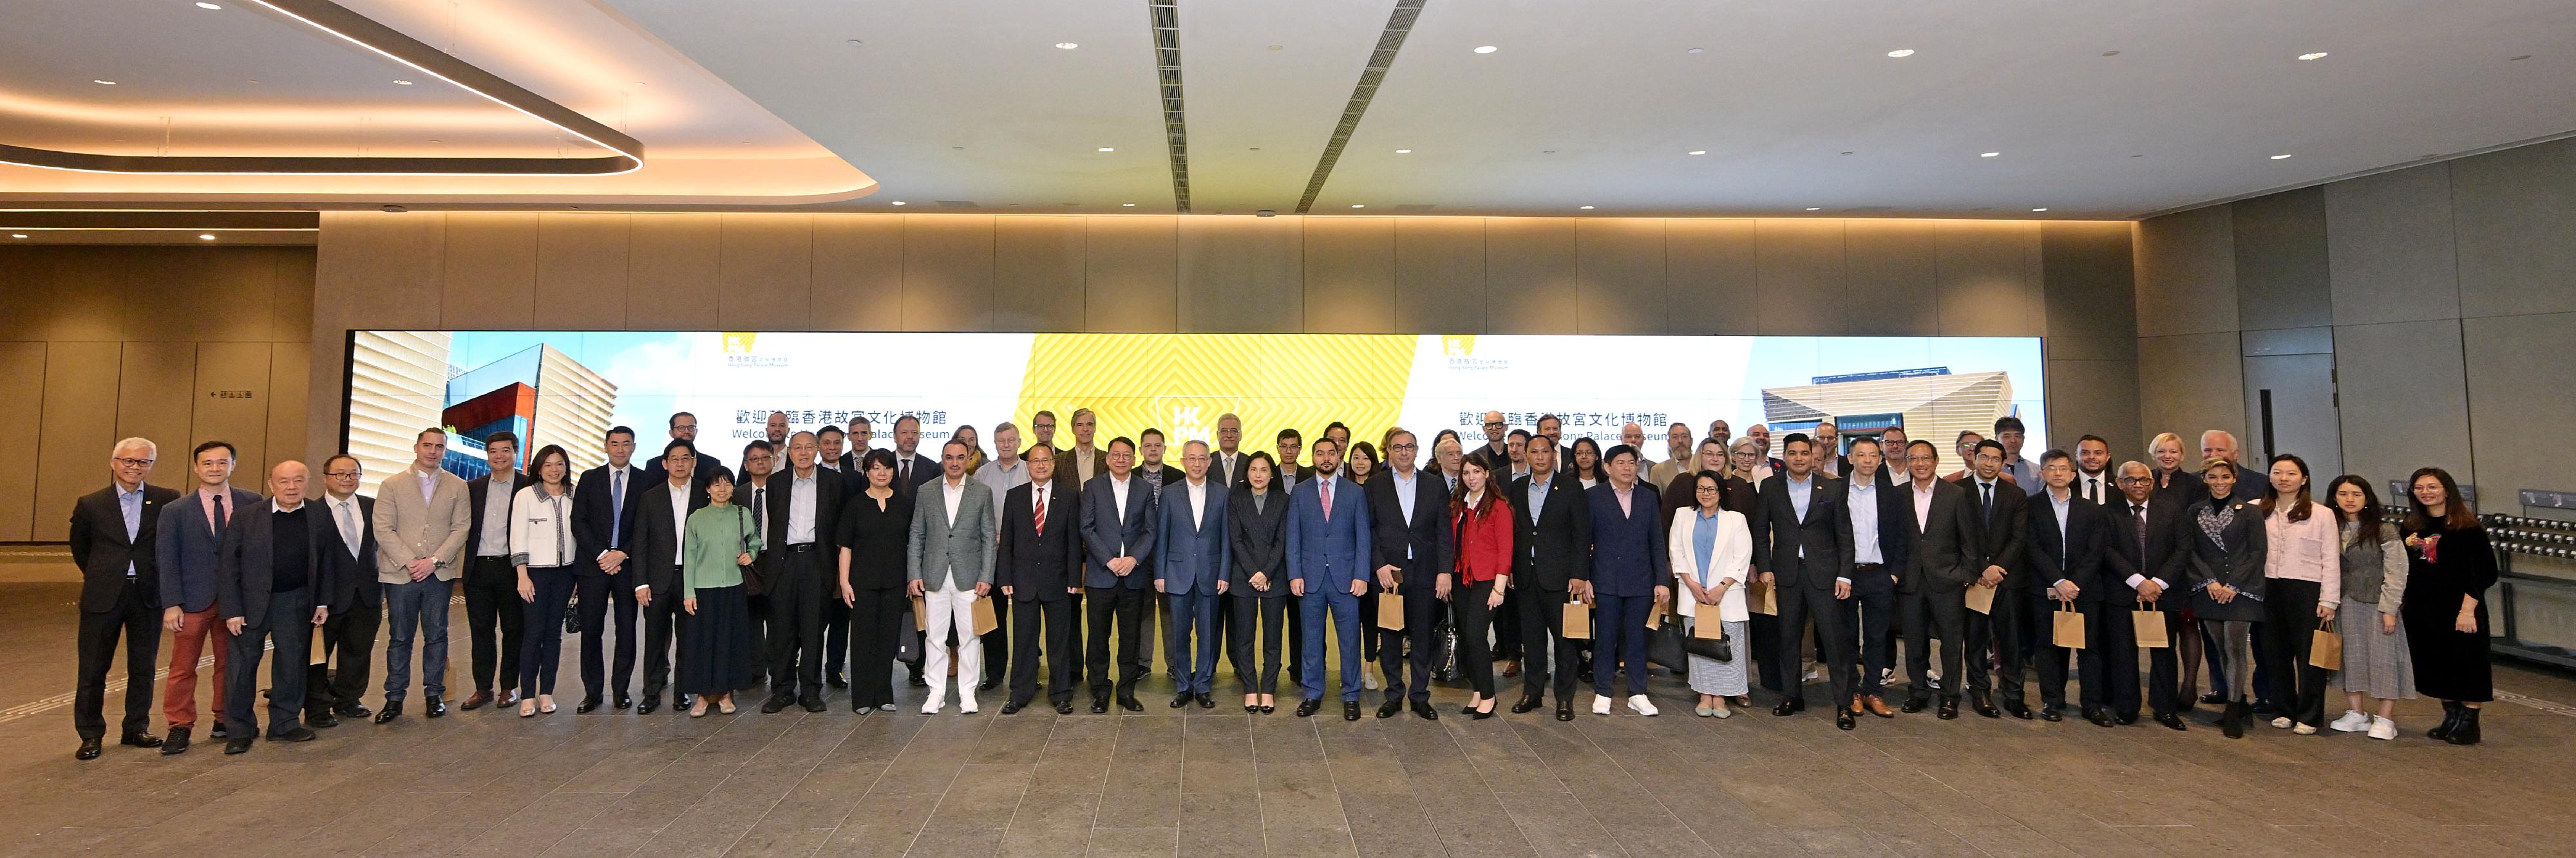 The Chief Secretary for Administration, Mr Chan Kwok-ki, attended "Thousands of Years at a Glance: Exploring Ancient Chinese Civilization - visit to Hong Kong Palace Museum" today (December 5). Photo shows Mr Chan (front row, 19th right); the Acting Commissioner of the Office of the Commissioner of the Ministry of Foreign Affairs of the People's Republic of China in the Hong Kong Special Administrative Region, Mr Li Yongsheng (front row, 18th right); the Chief Executive Officer of the West Kowloon Cultural District Authority, Mrs Betty Fung (front row, 17th right), and other guests at the event. 